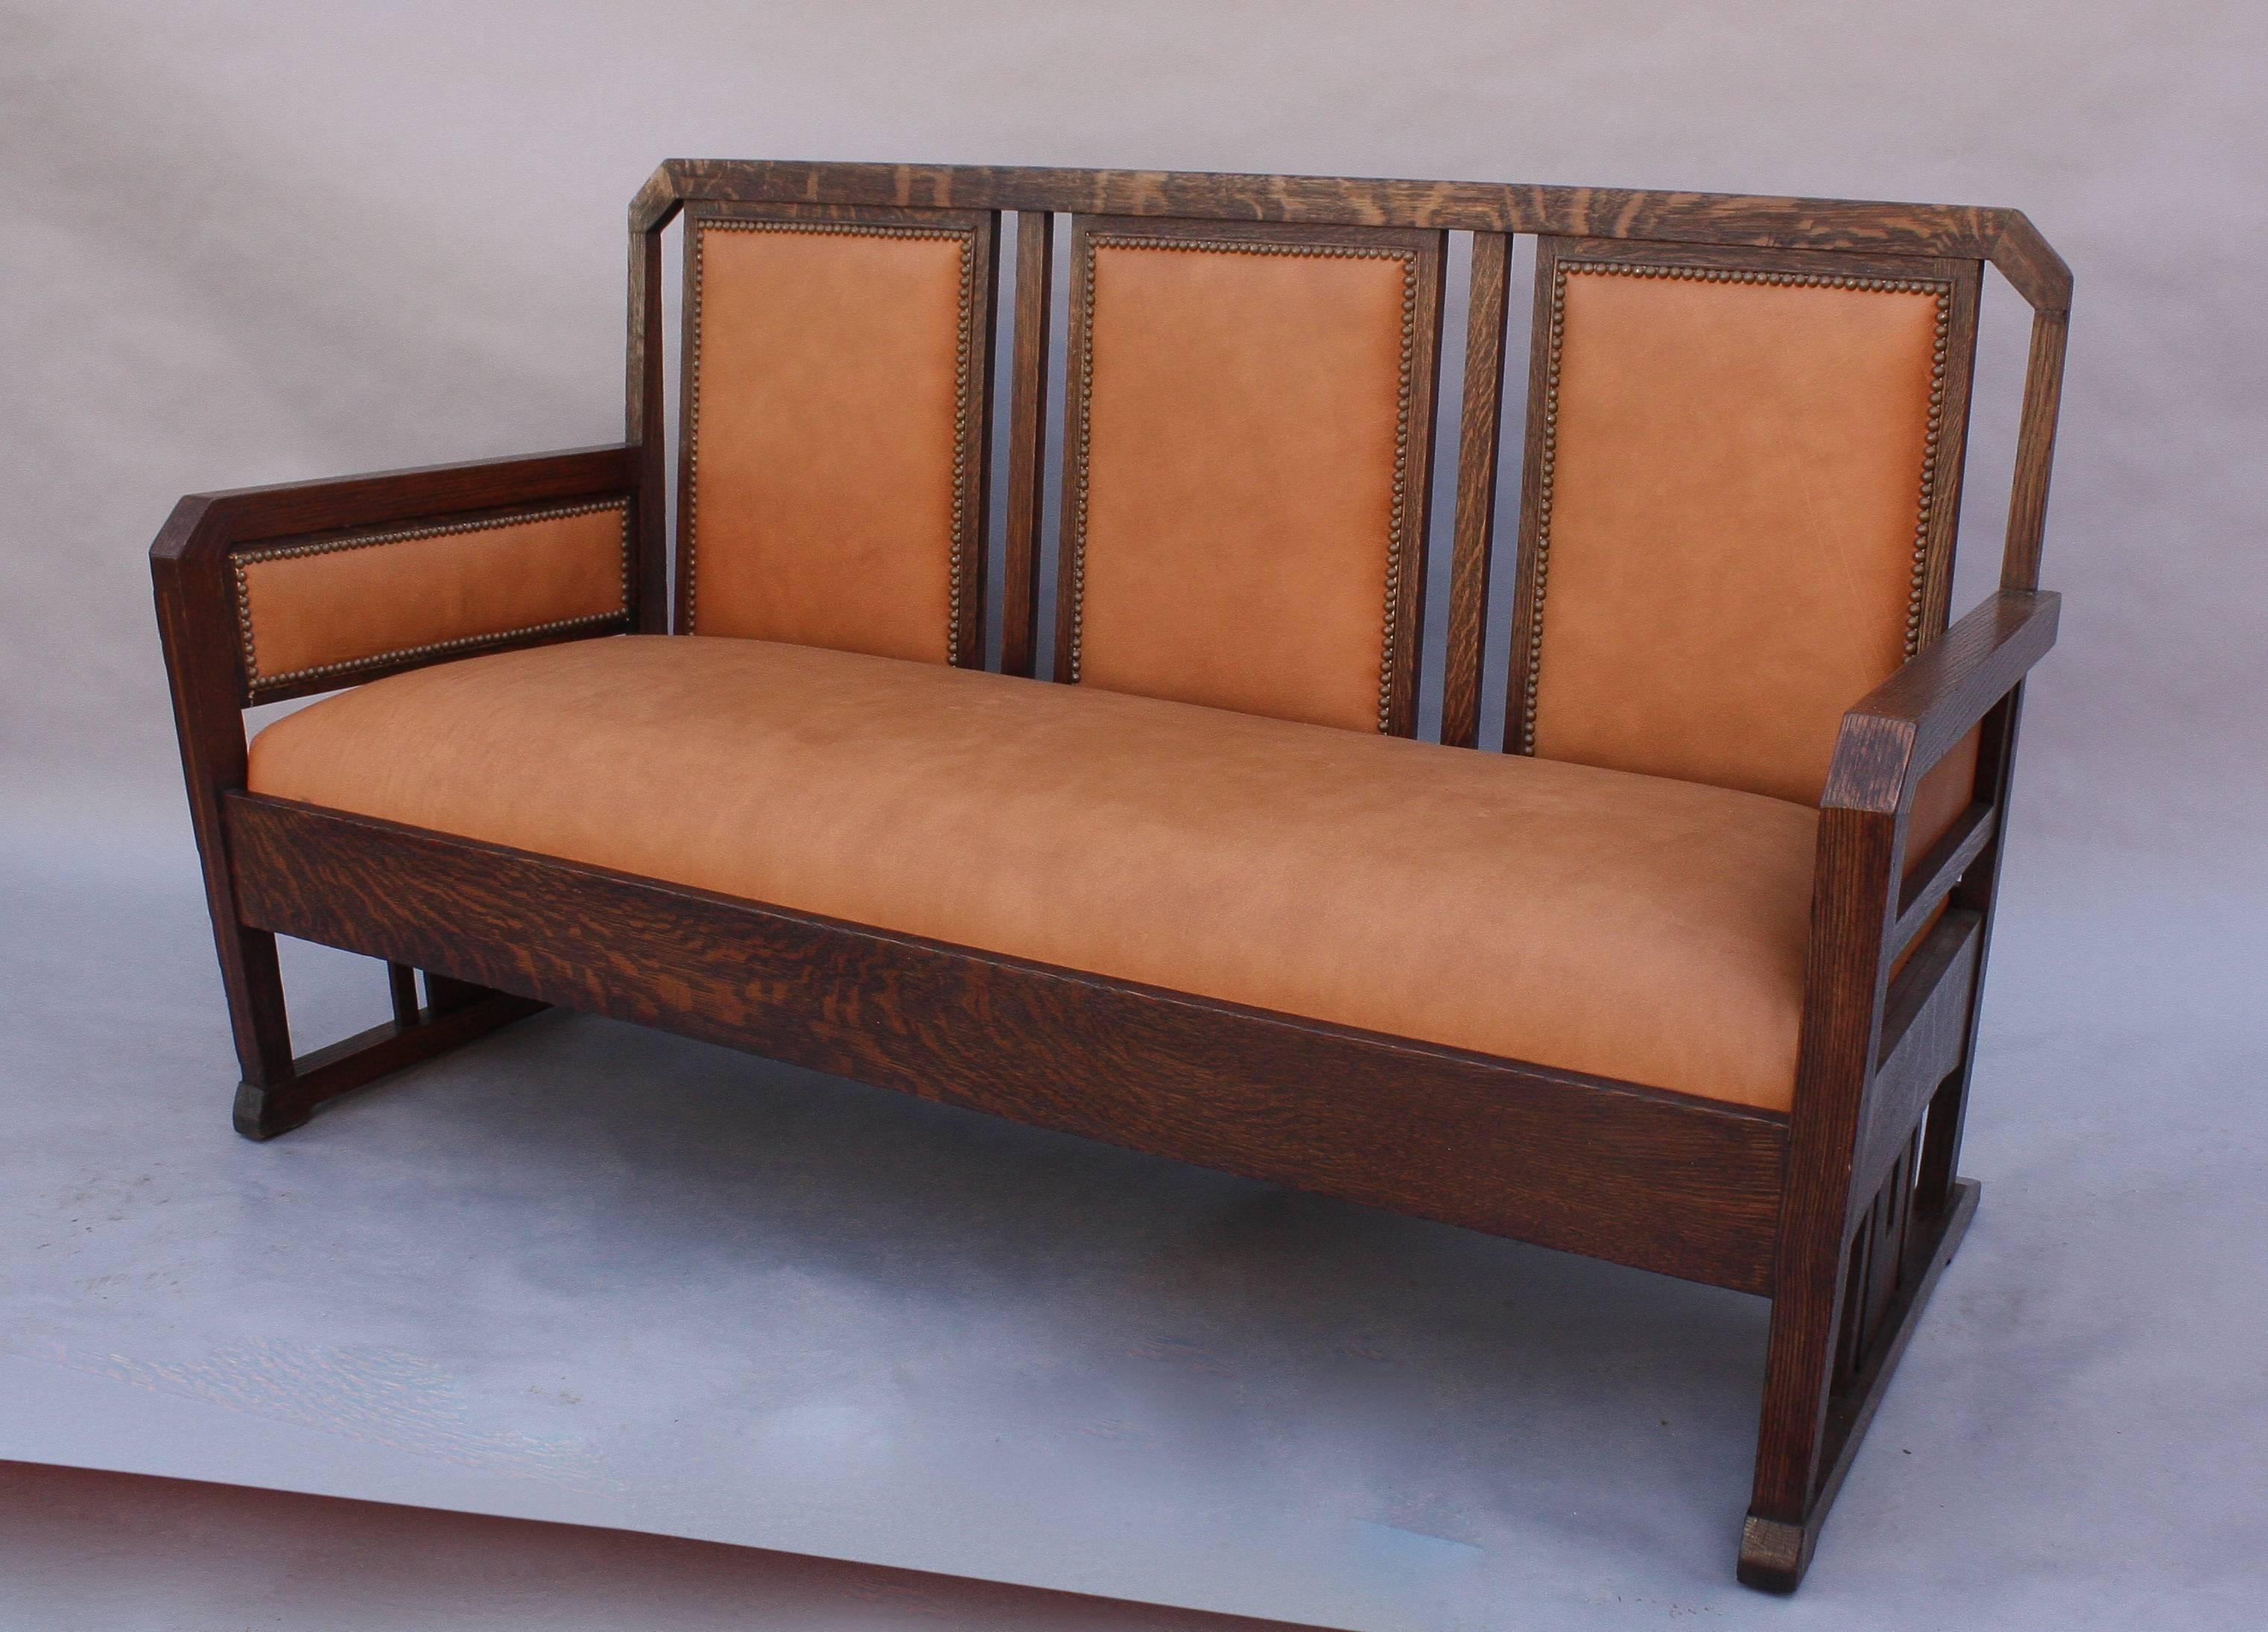 Arts & Crafts period oak settle with new leather upholstery.